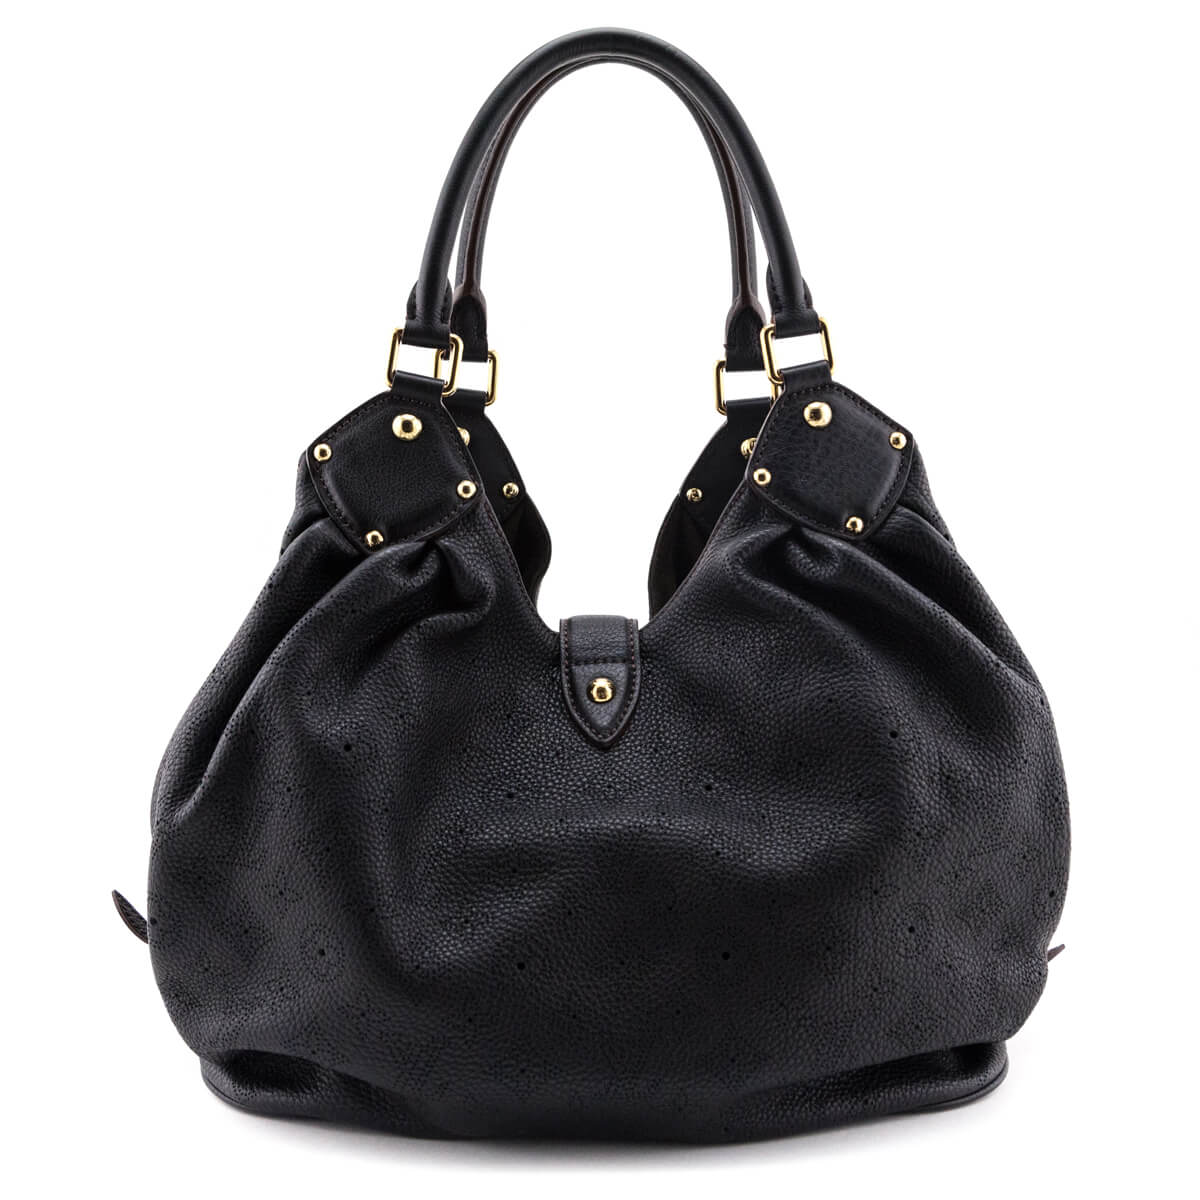 WE'RE IN LOVE!!!!!!! Previously owned Louis Vuitton Mahina hobo in